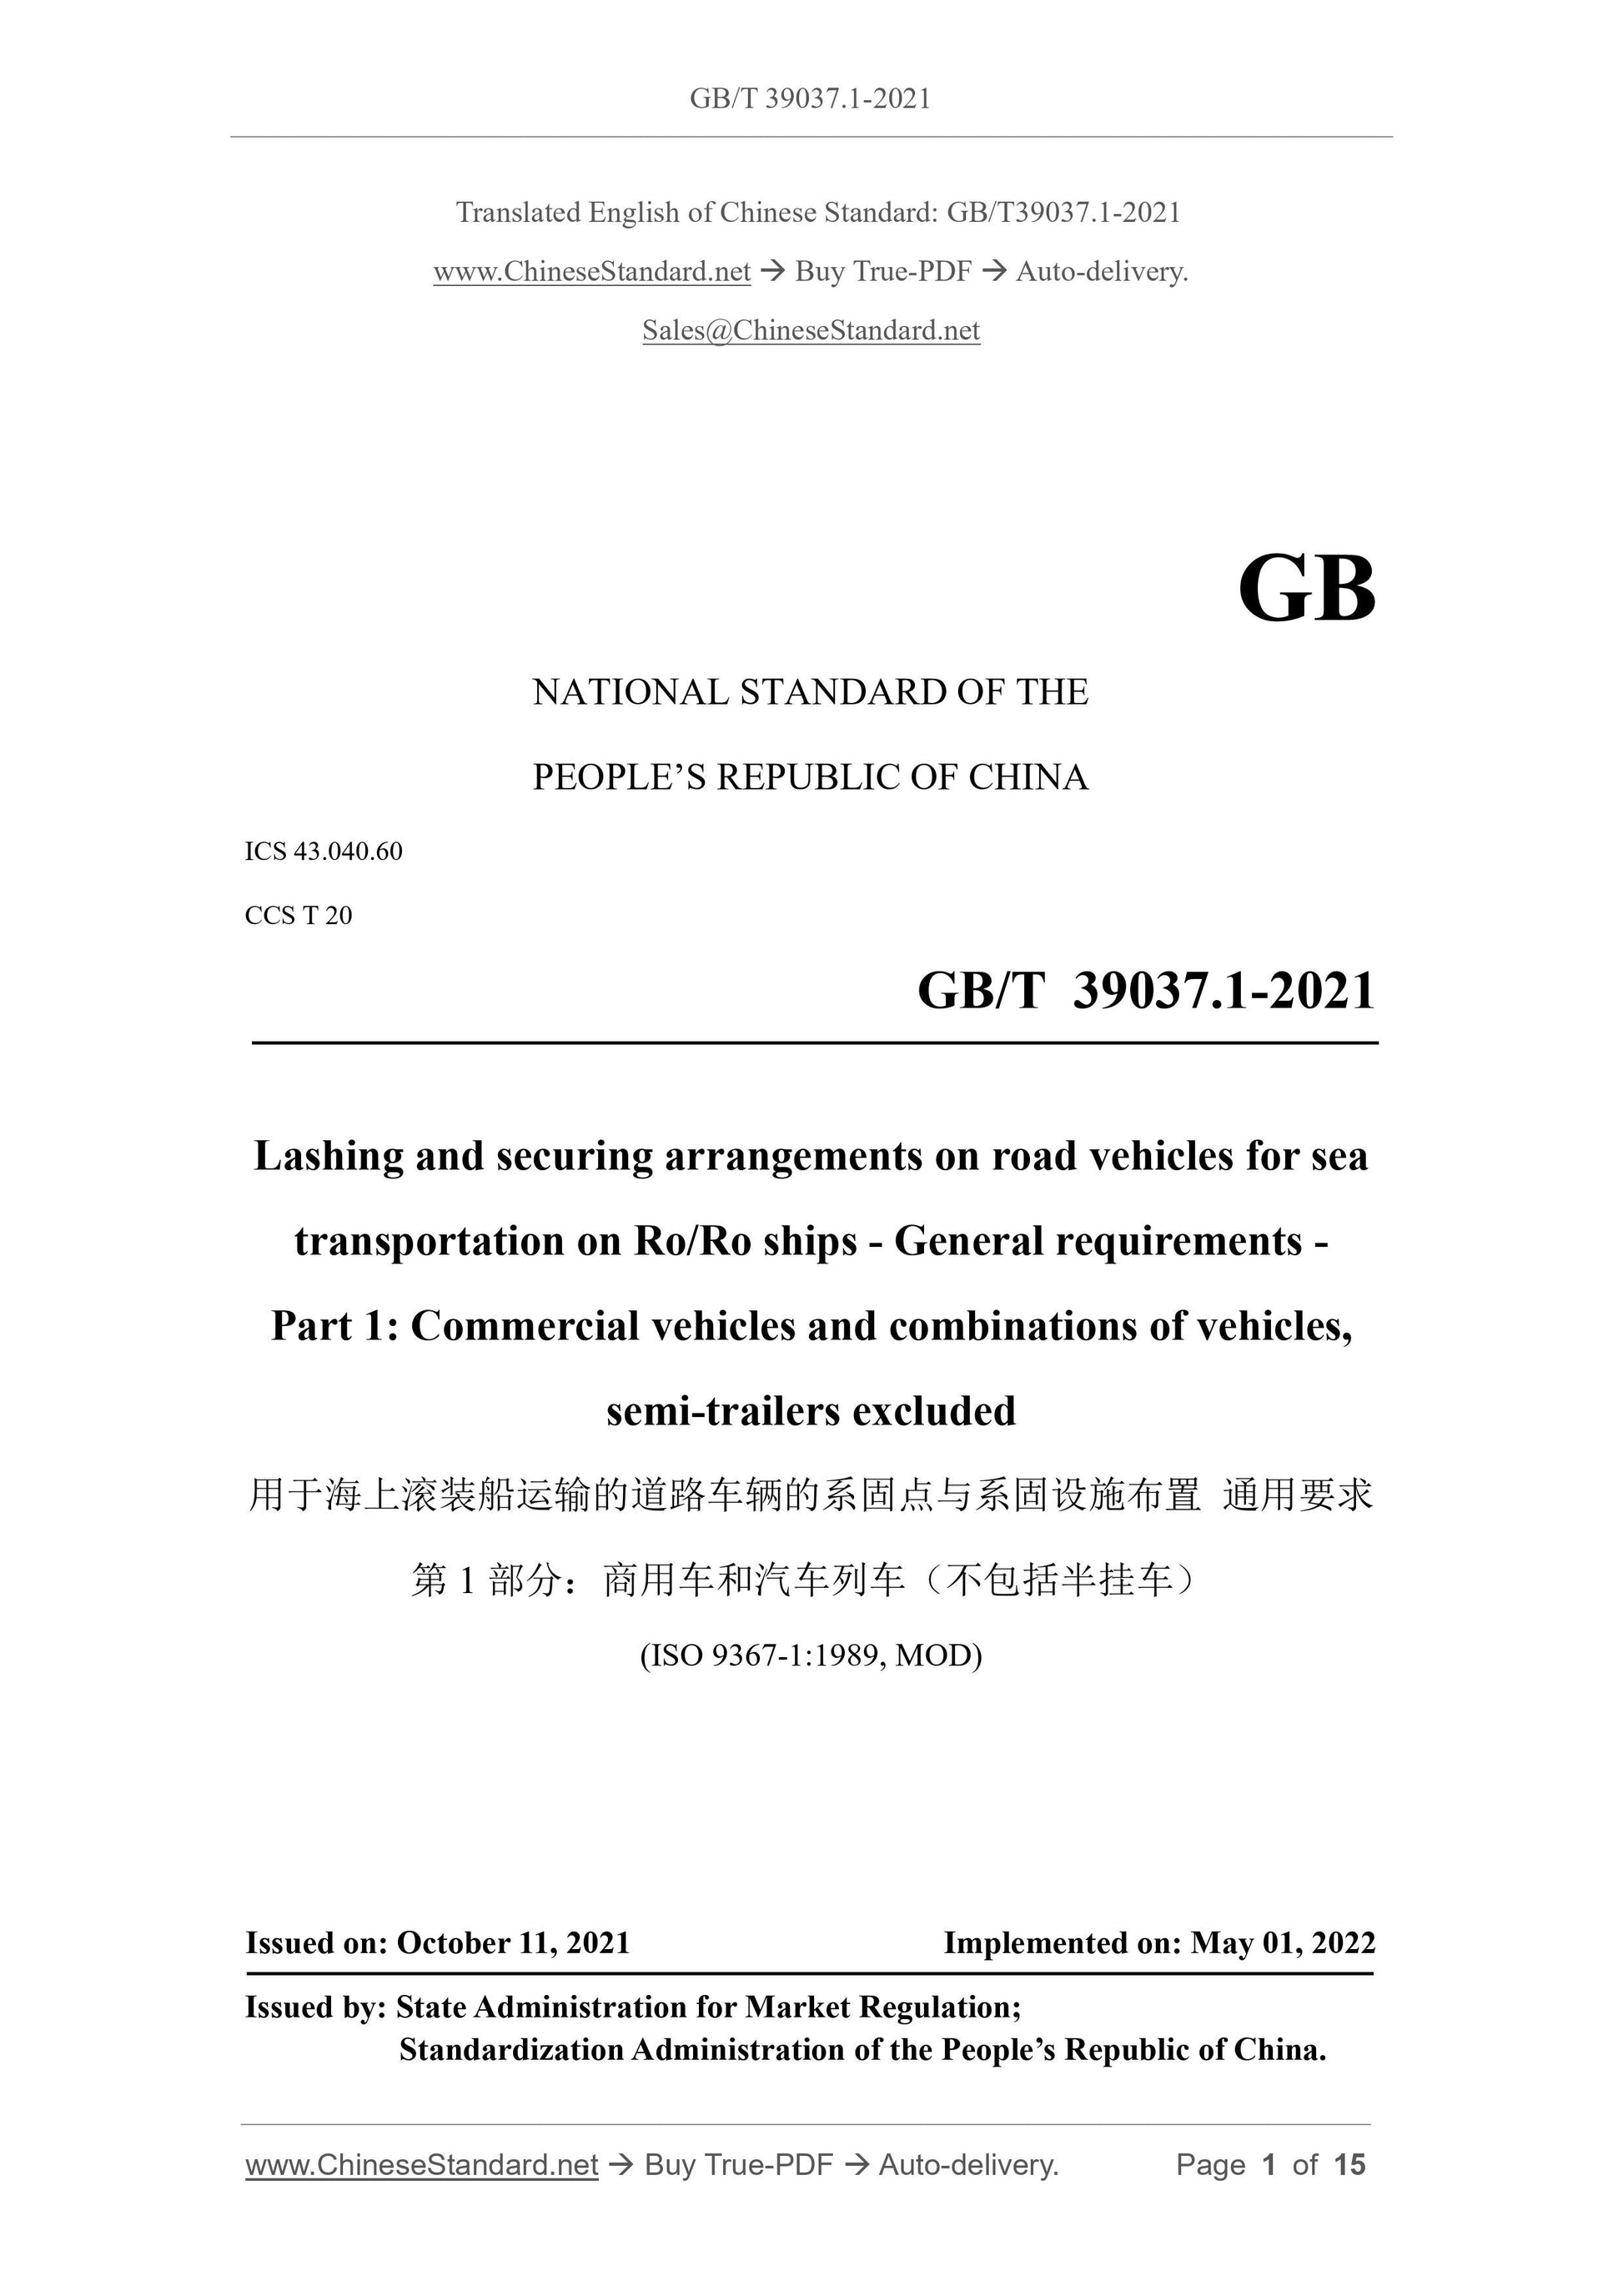 GB/T 39037.1-2021 Page 1